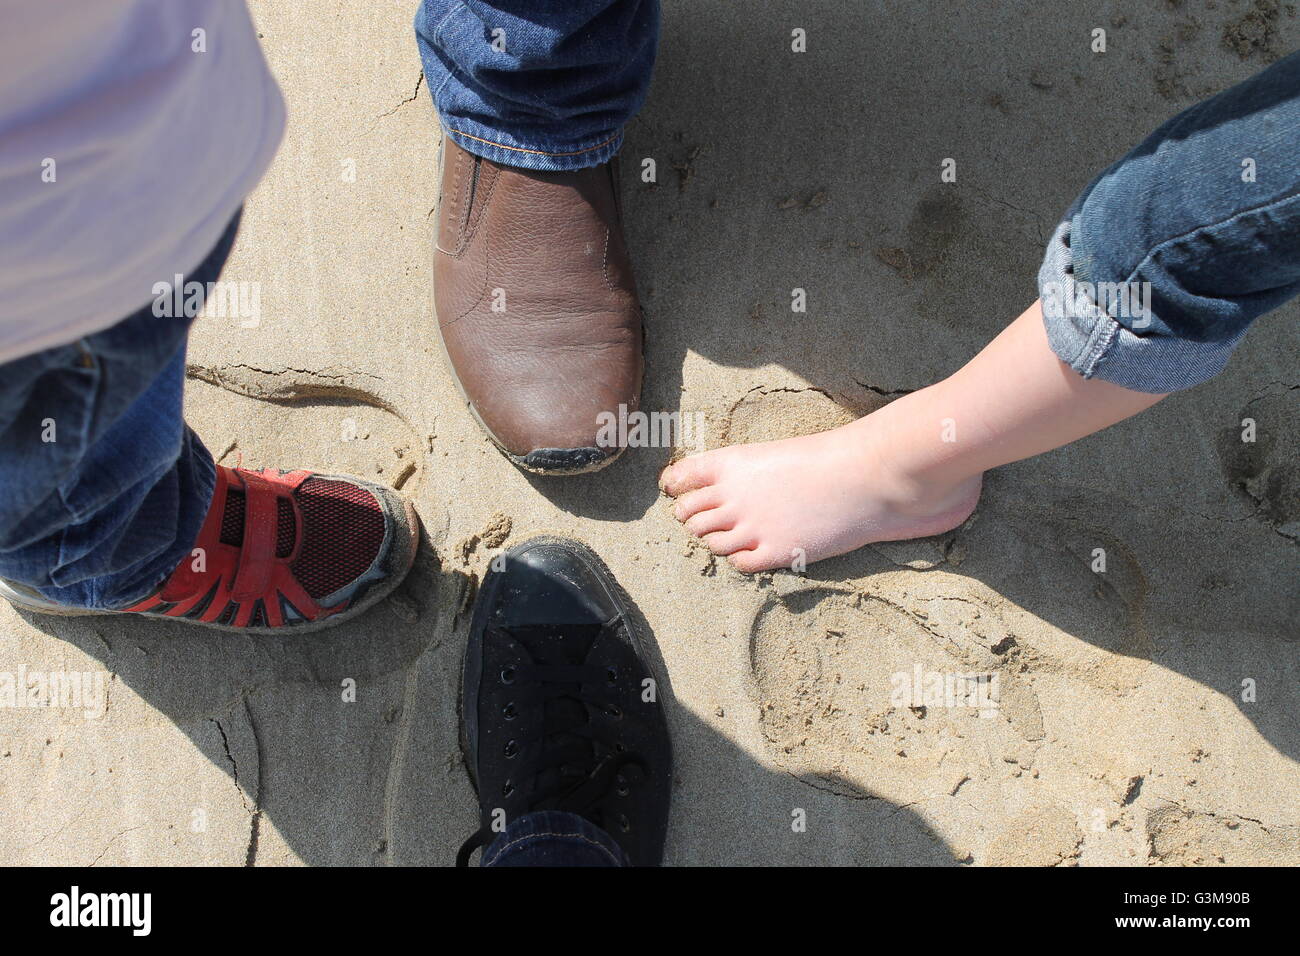 Sand, footprints, family holiday, Cornwall, four, 4 Stock Photo